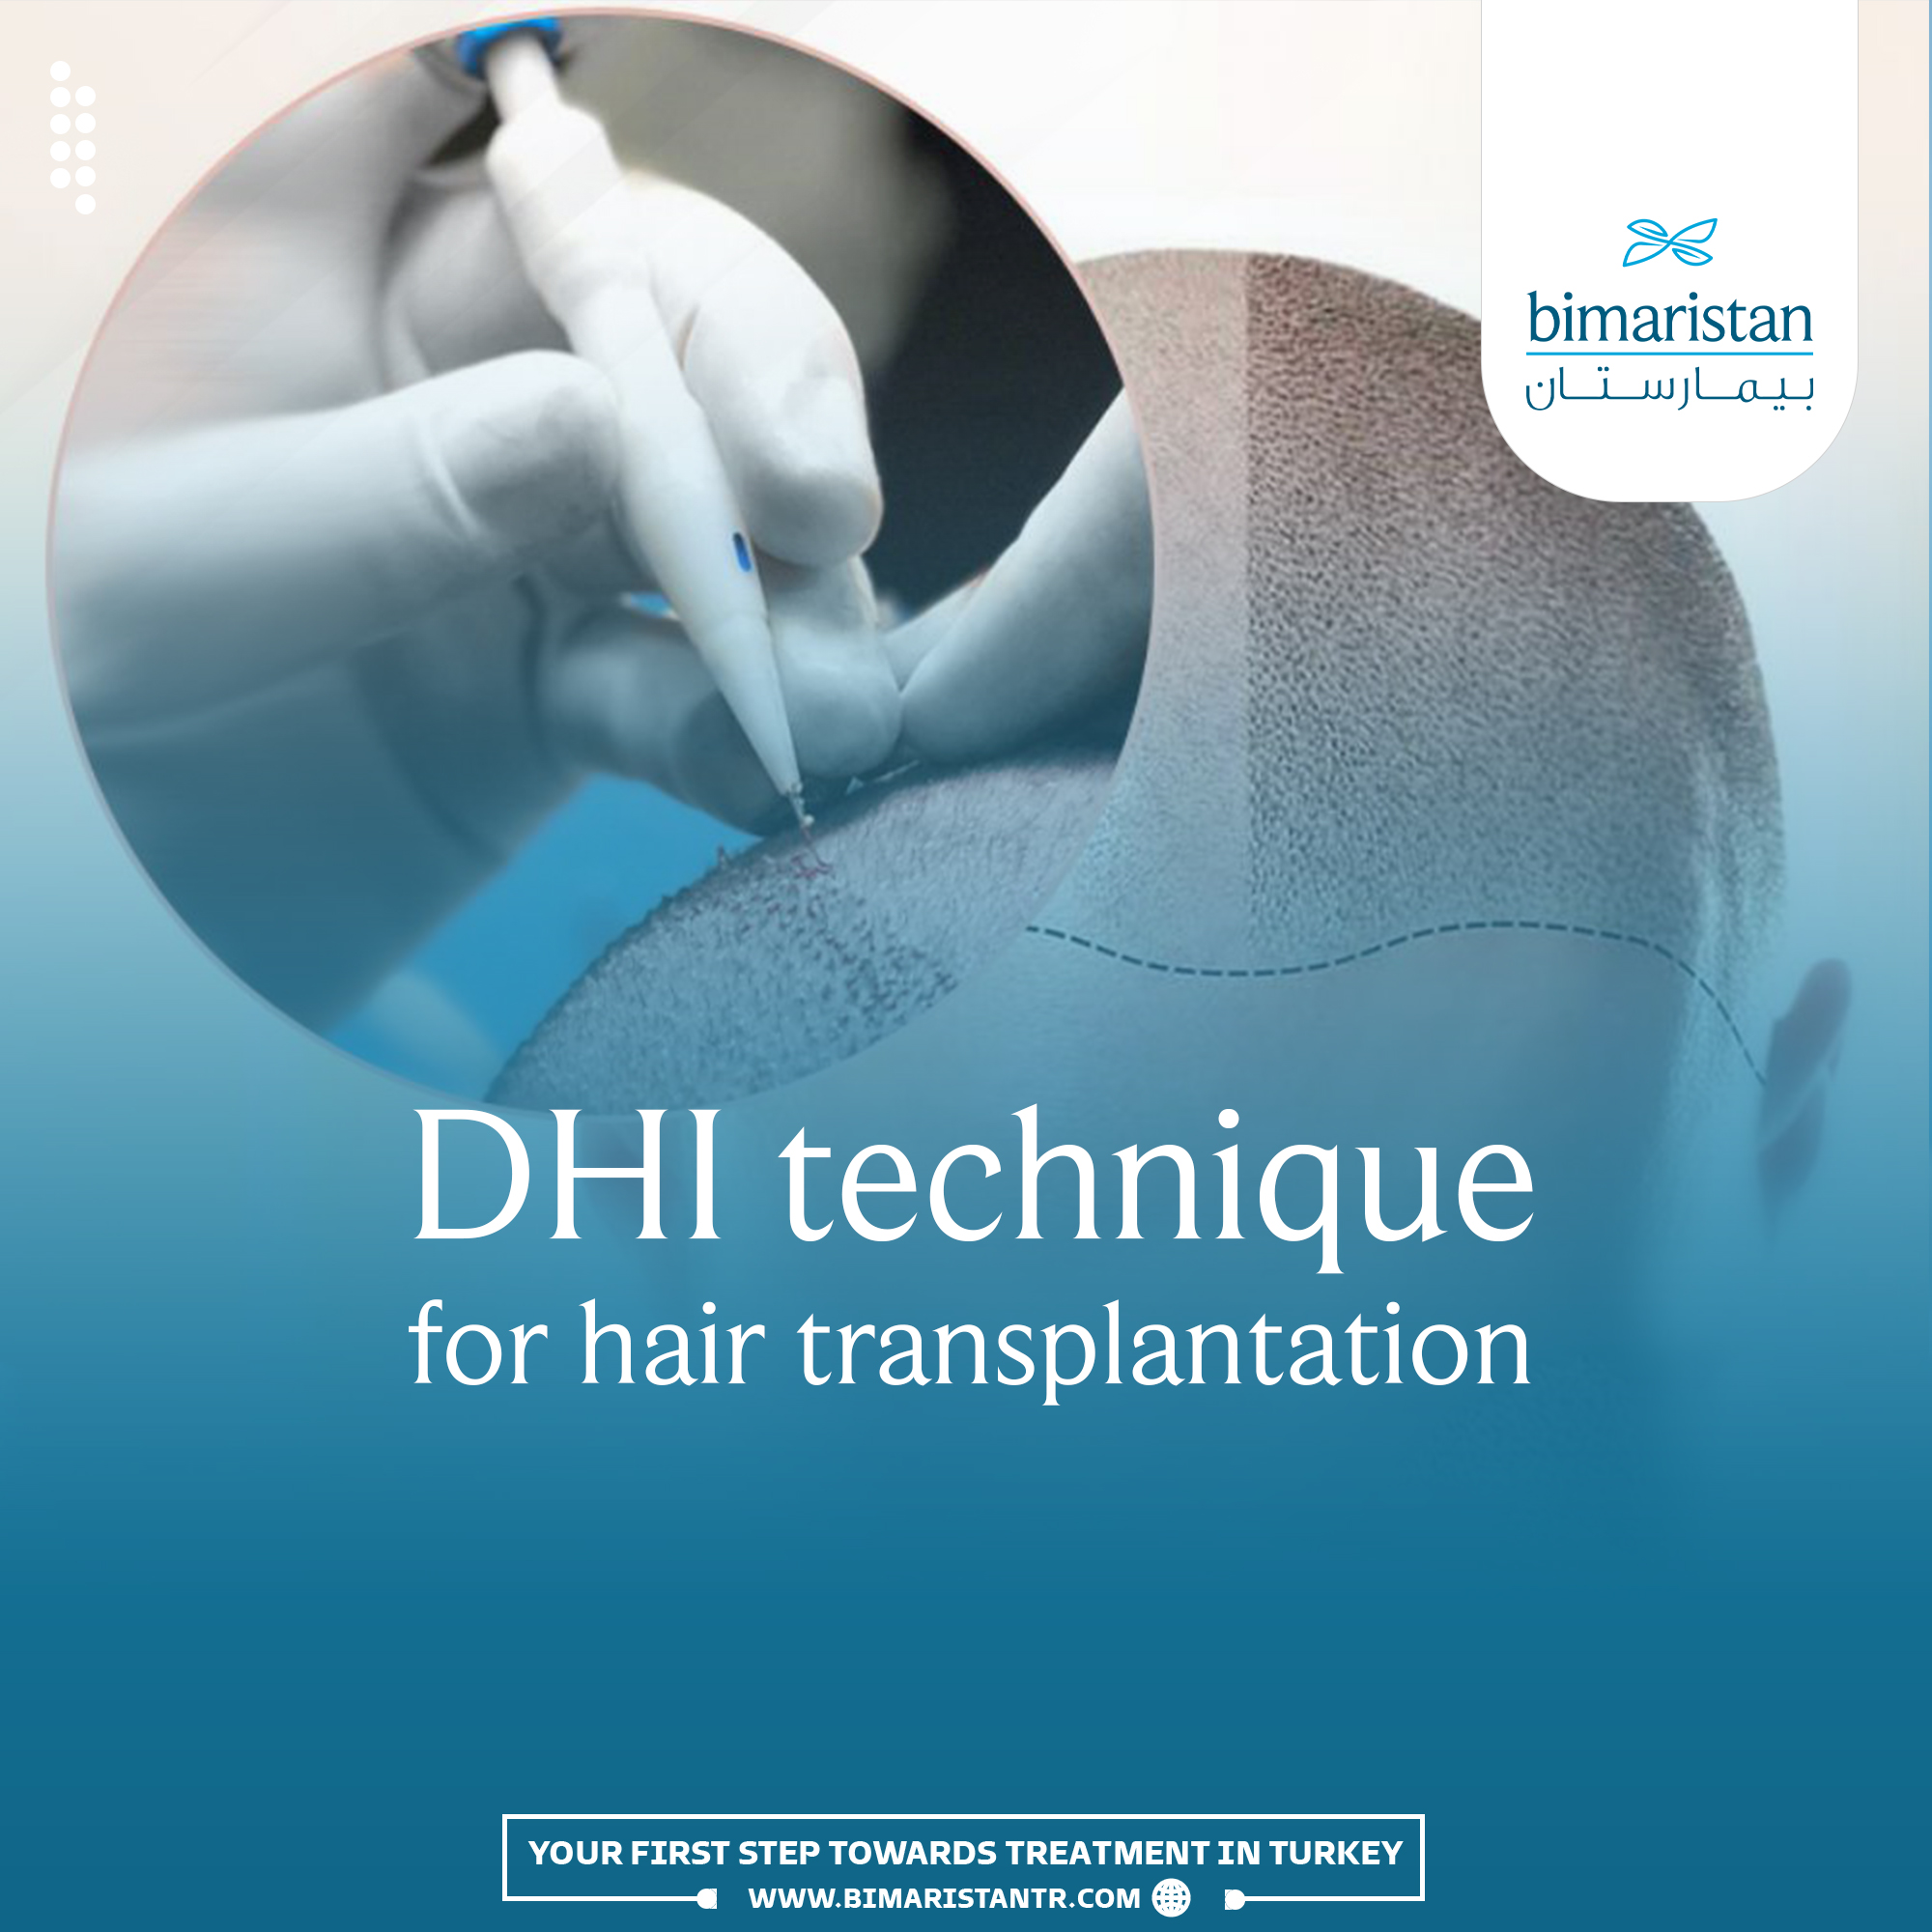 Cover image for the DHI Hair Transplant Technique article.